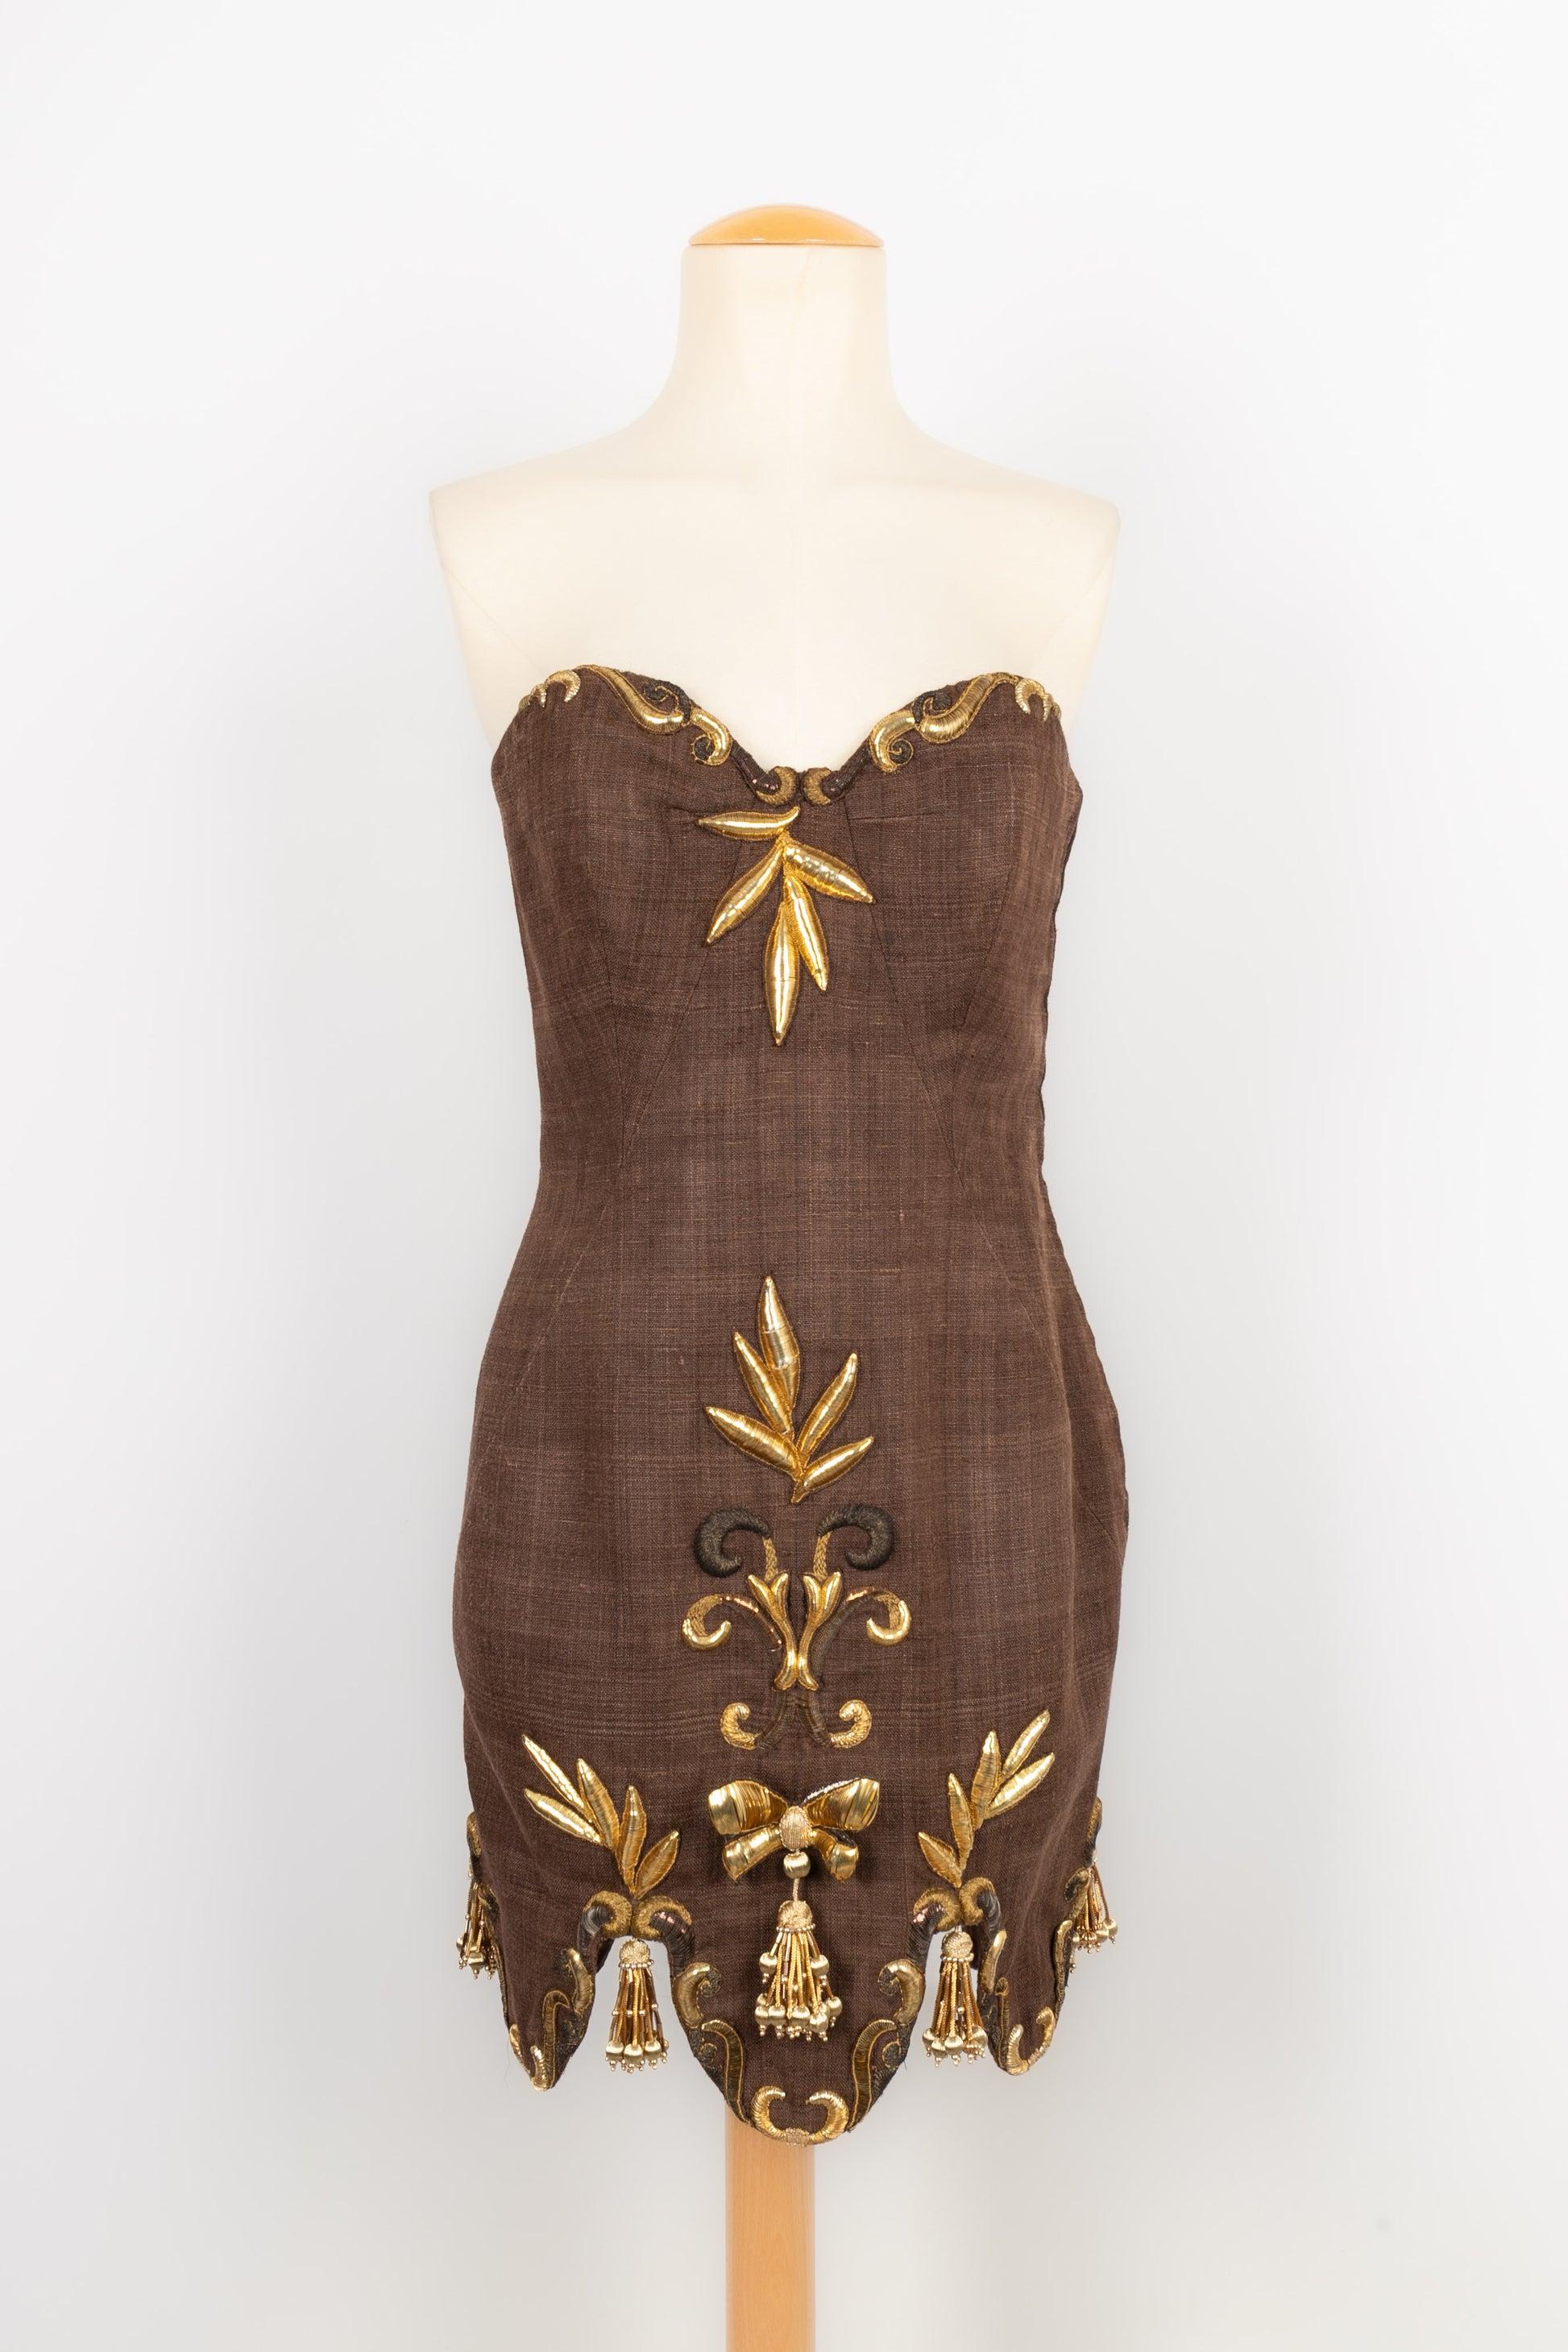 Christian Lacroix - Robe Haute Couture dress in brown linen and golden embroidery. No size indicated, it fits a 36FR/38FR.

Additional information:
Condition: Good condition
Dimensions: Chest: 42 cm - Waist: 35 cm - Length: 70 cm

Seller Reference: